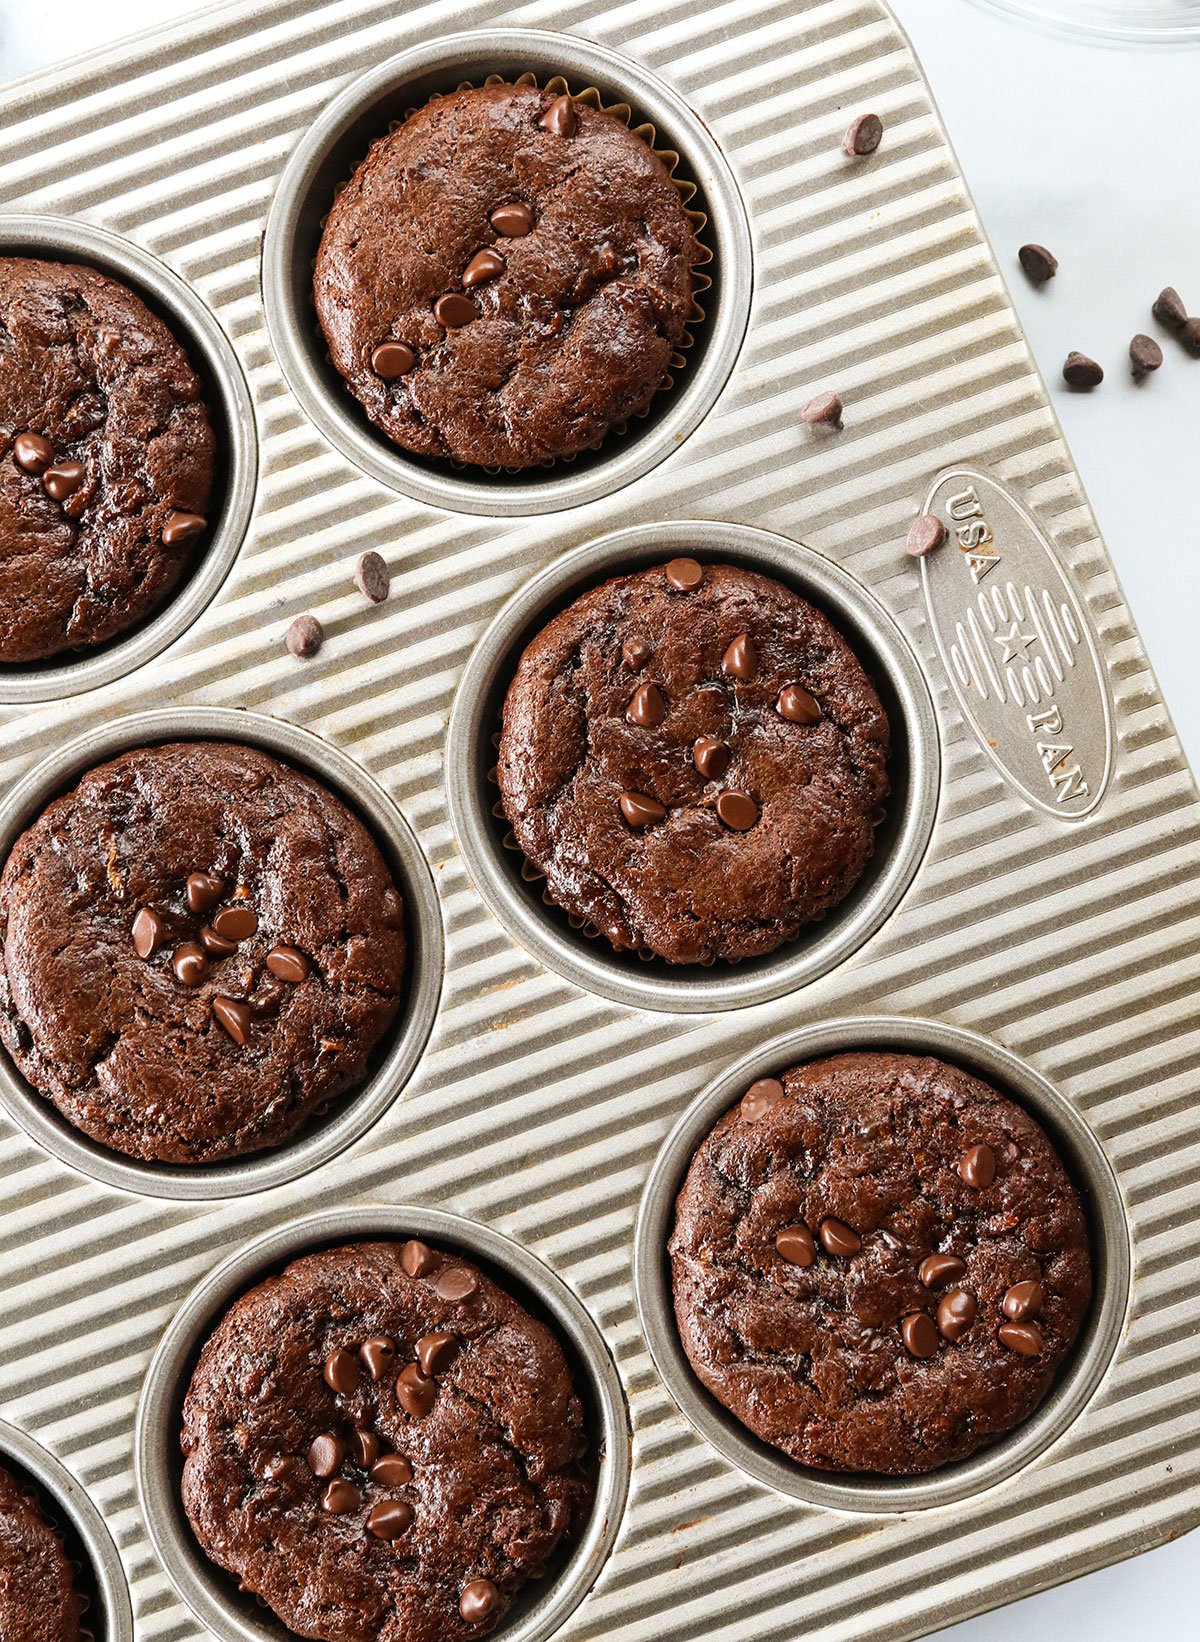 Chocolate zucchini muffins baked in a silver pan.